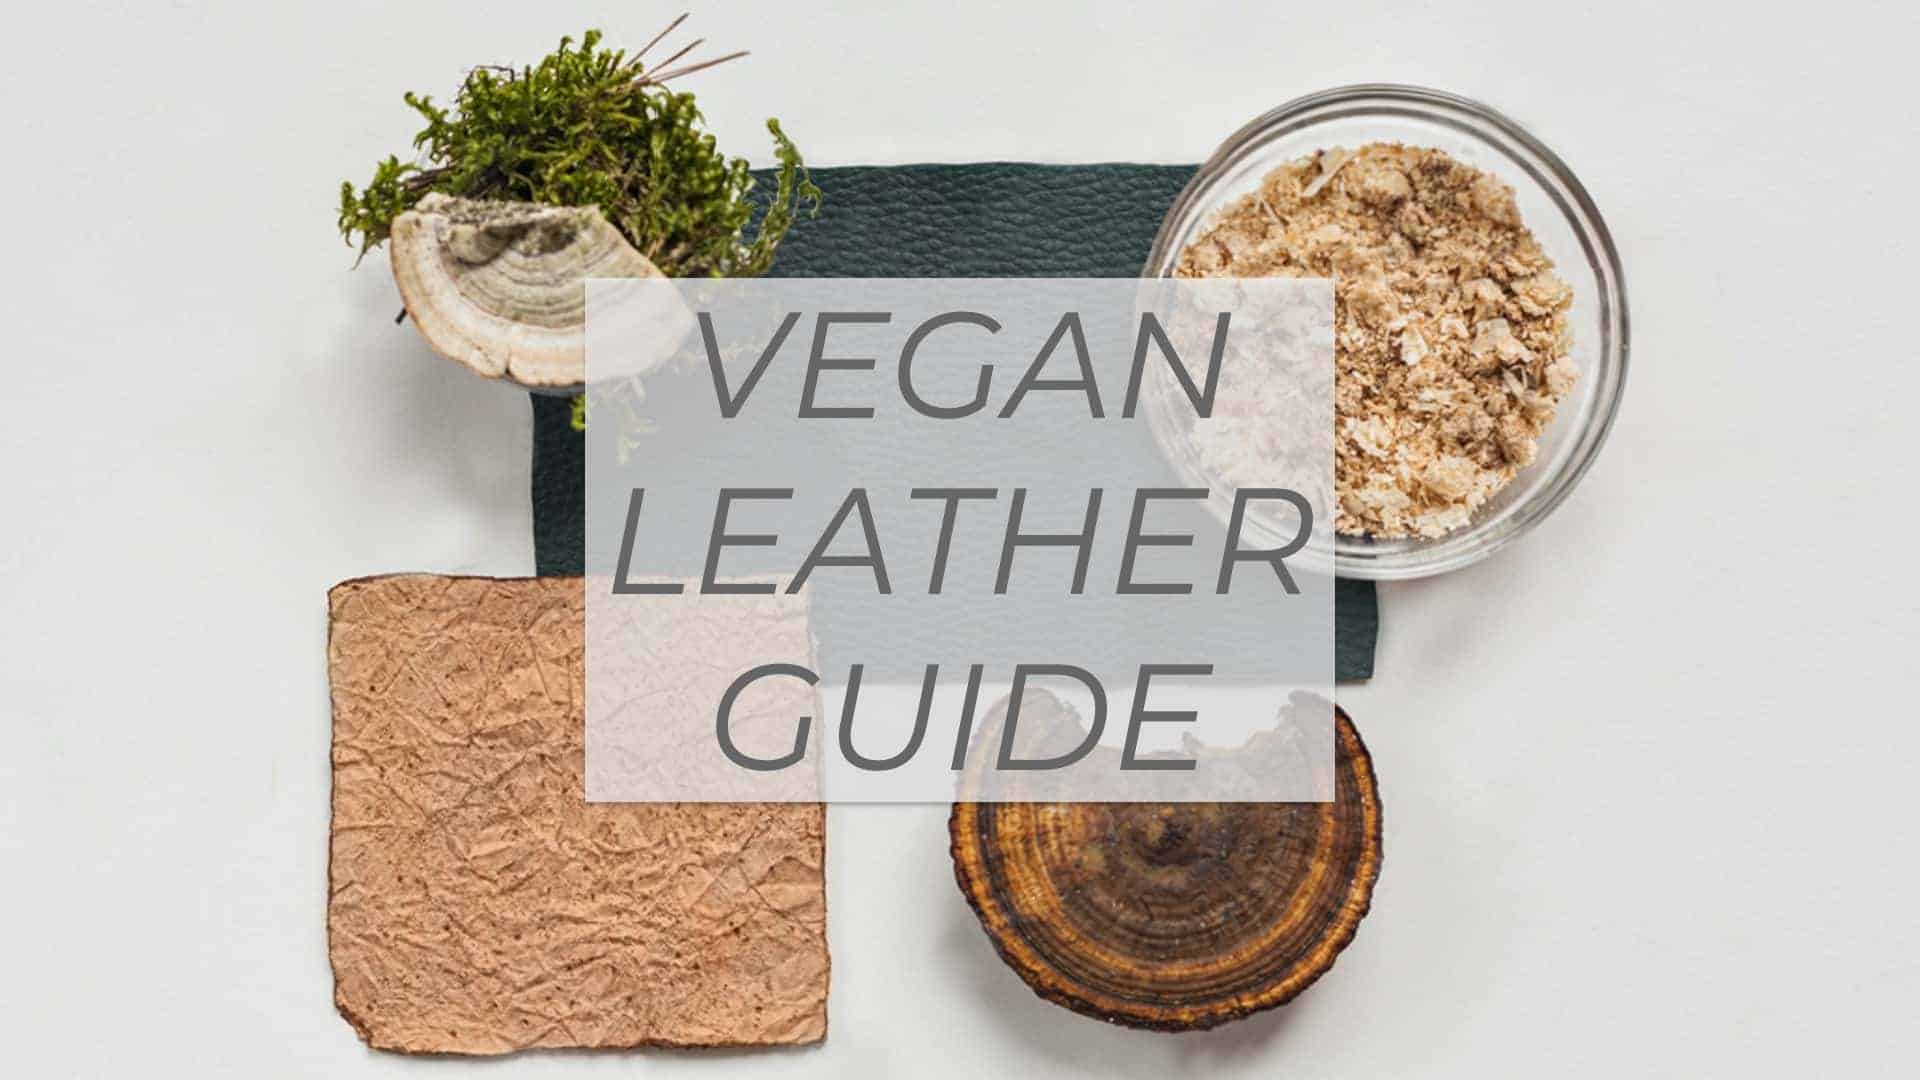 29 Best Vegan Handbags in 2022 For a Leather Alternative Accessory